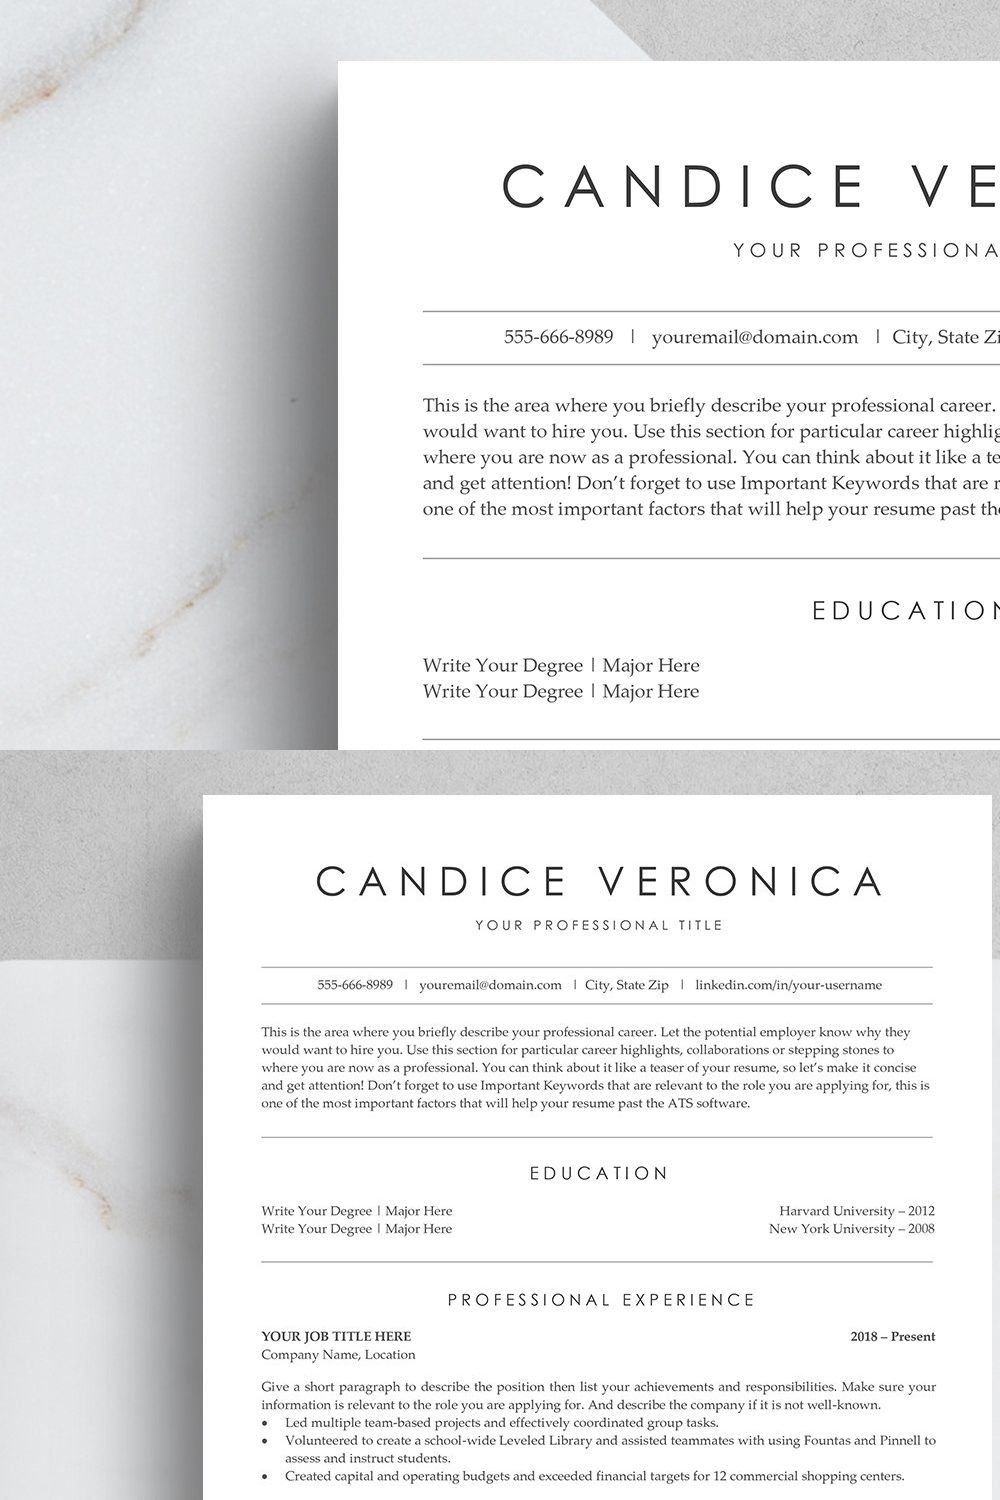 ATS Resume Template - CANDICE pinterest preview image.